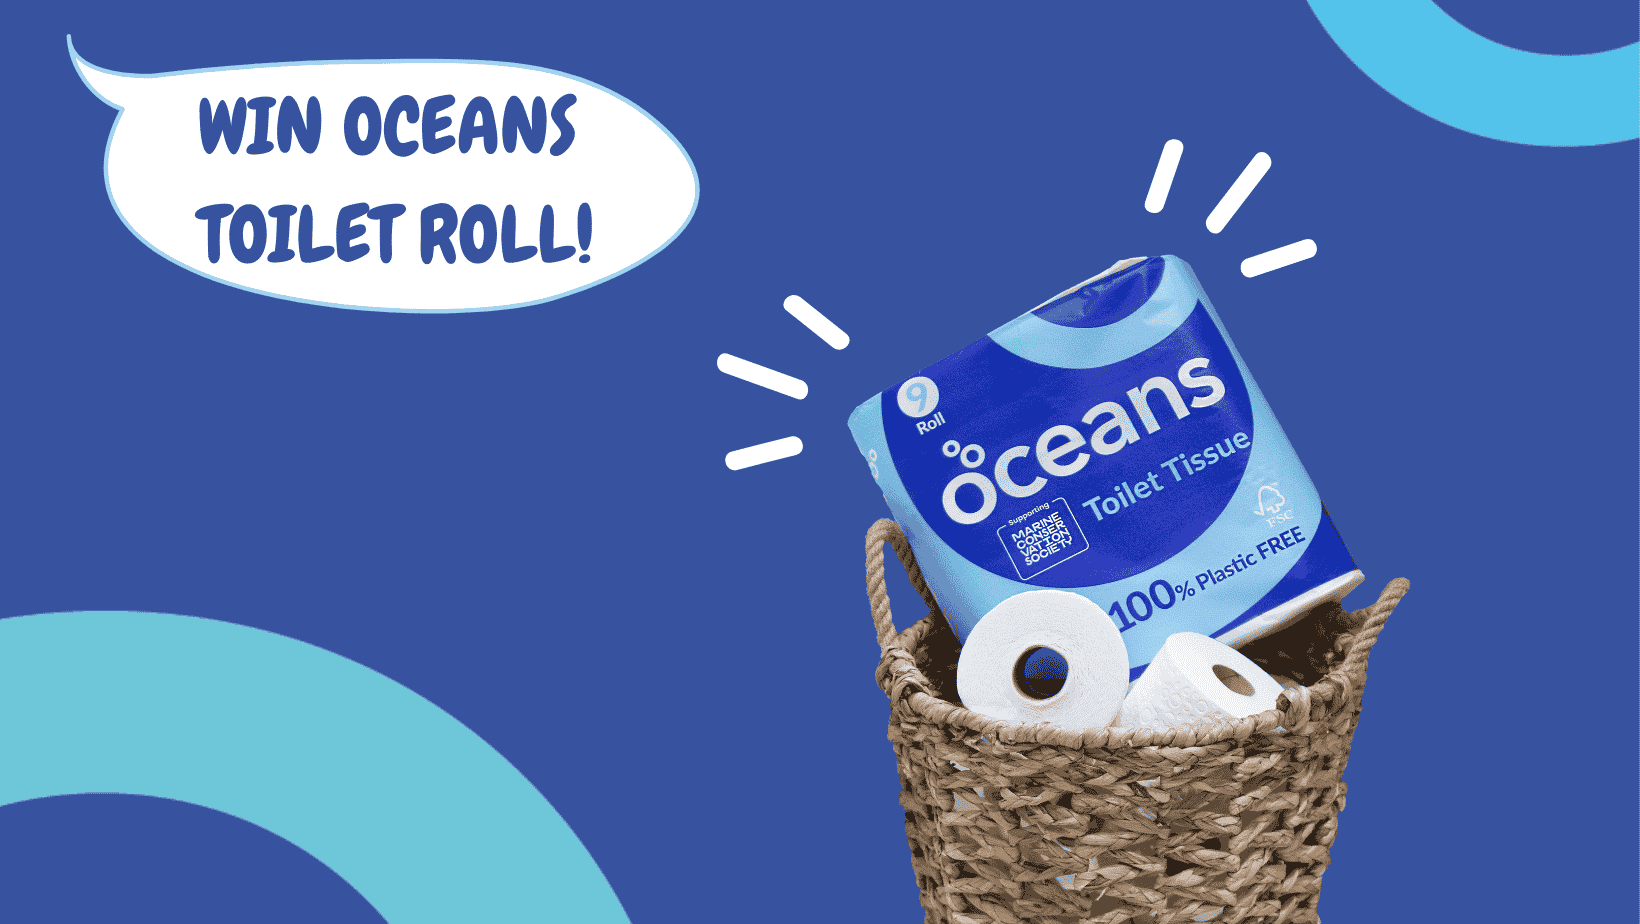 illustration advertising Oceans plastic-free toilet roll as a prize